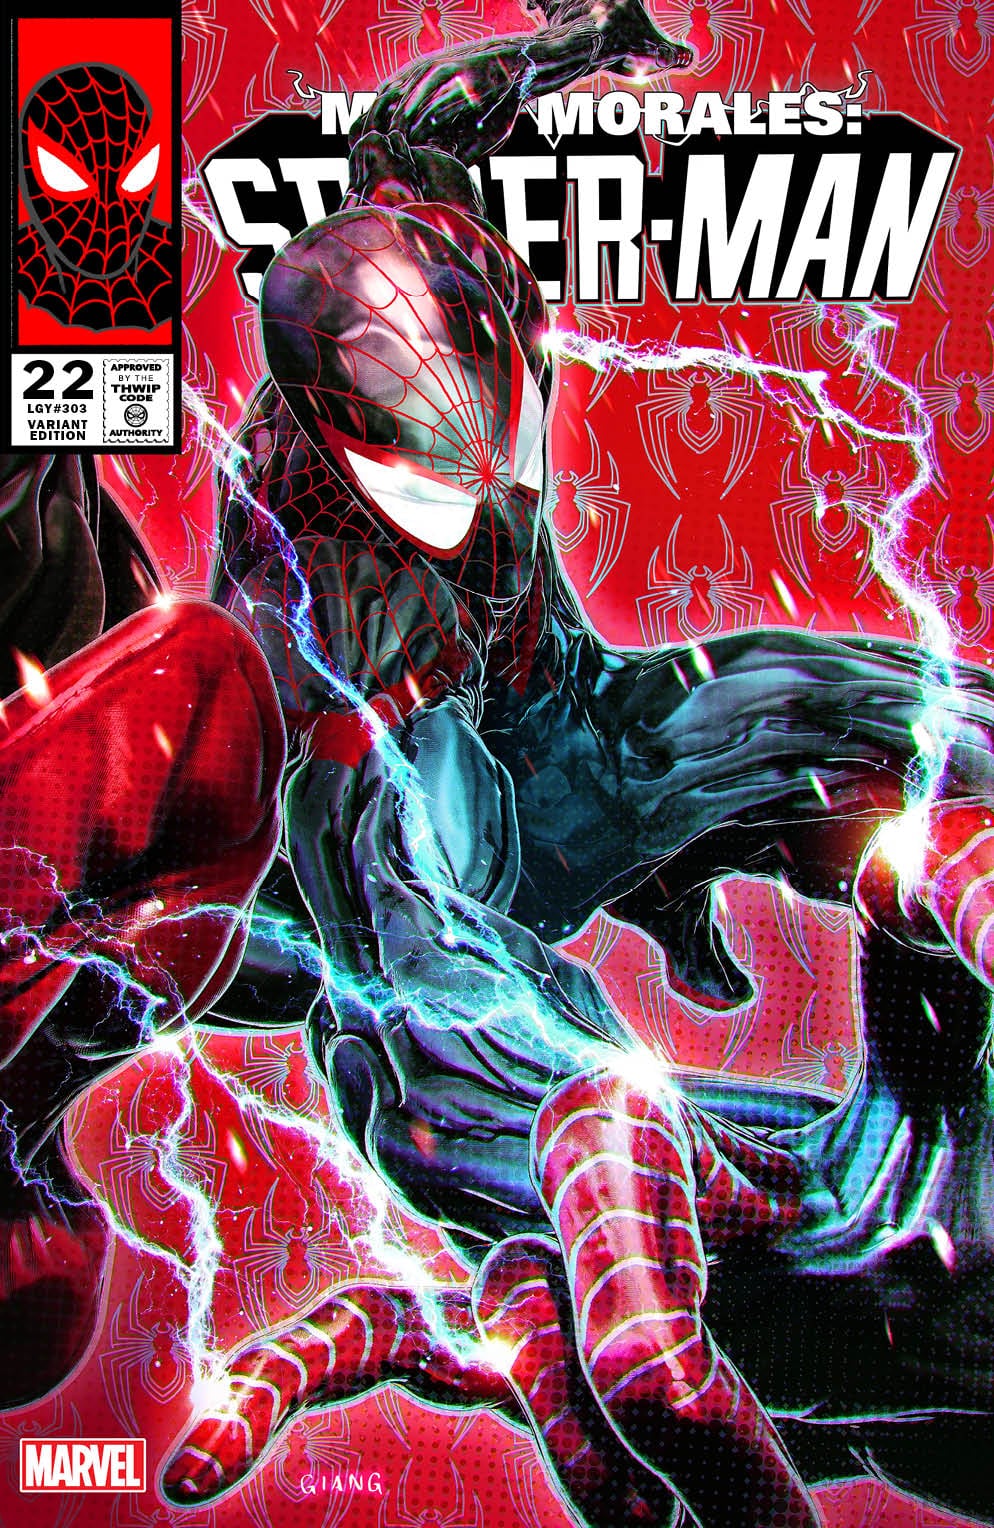 MILES MORALES: SPIDER-MAN #22 JOHN GIANG EXCLUSIVE VARIANT OPTIONS 07-03-24